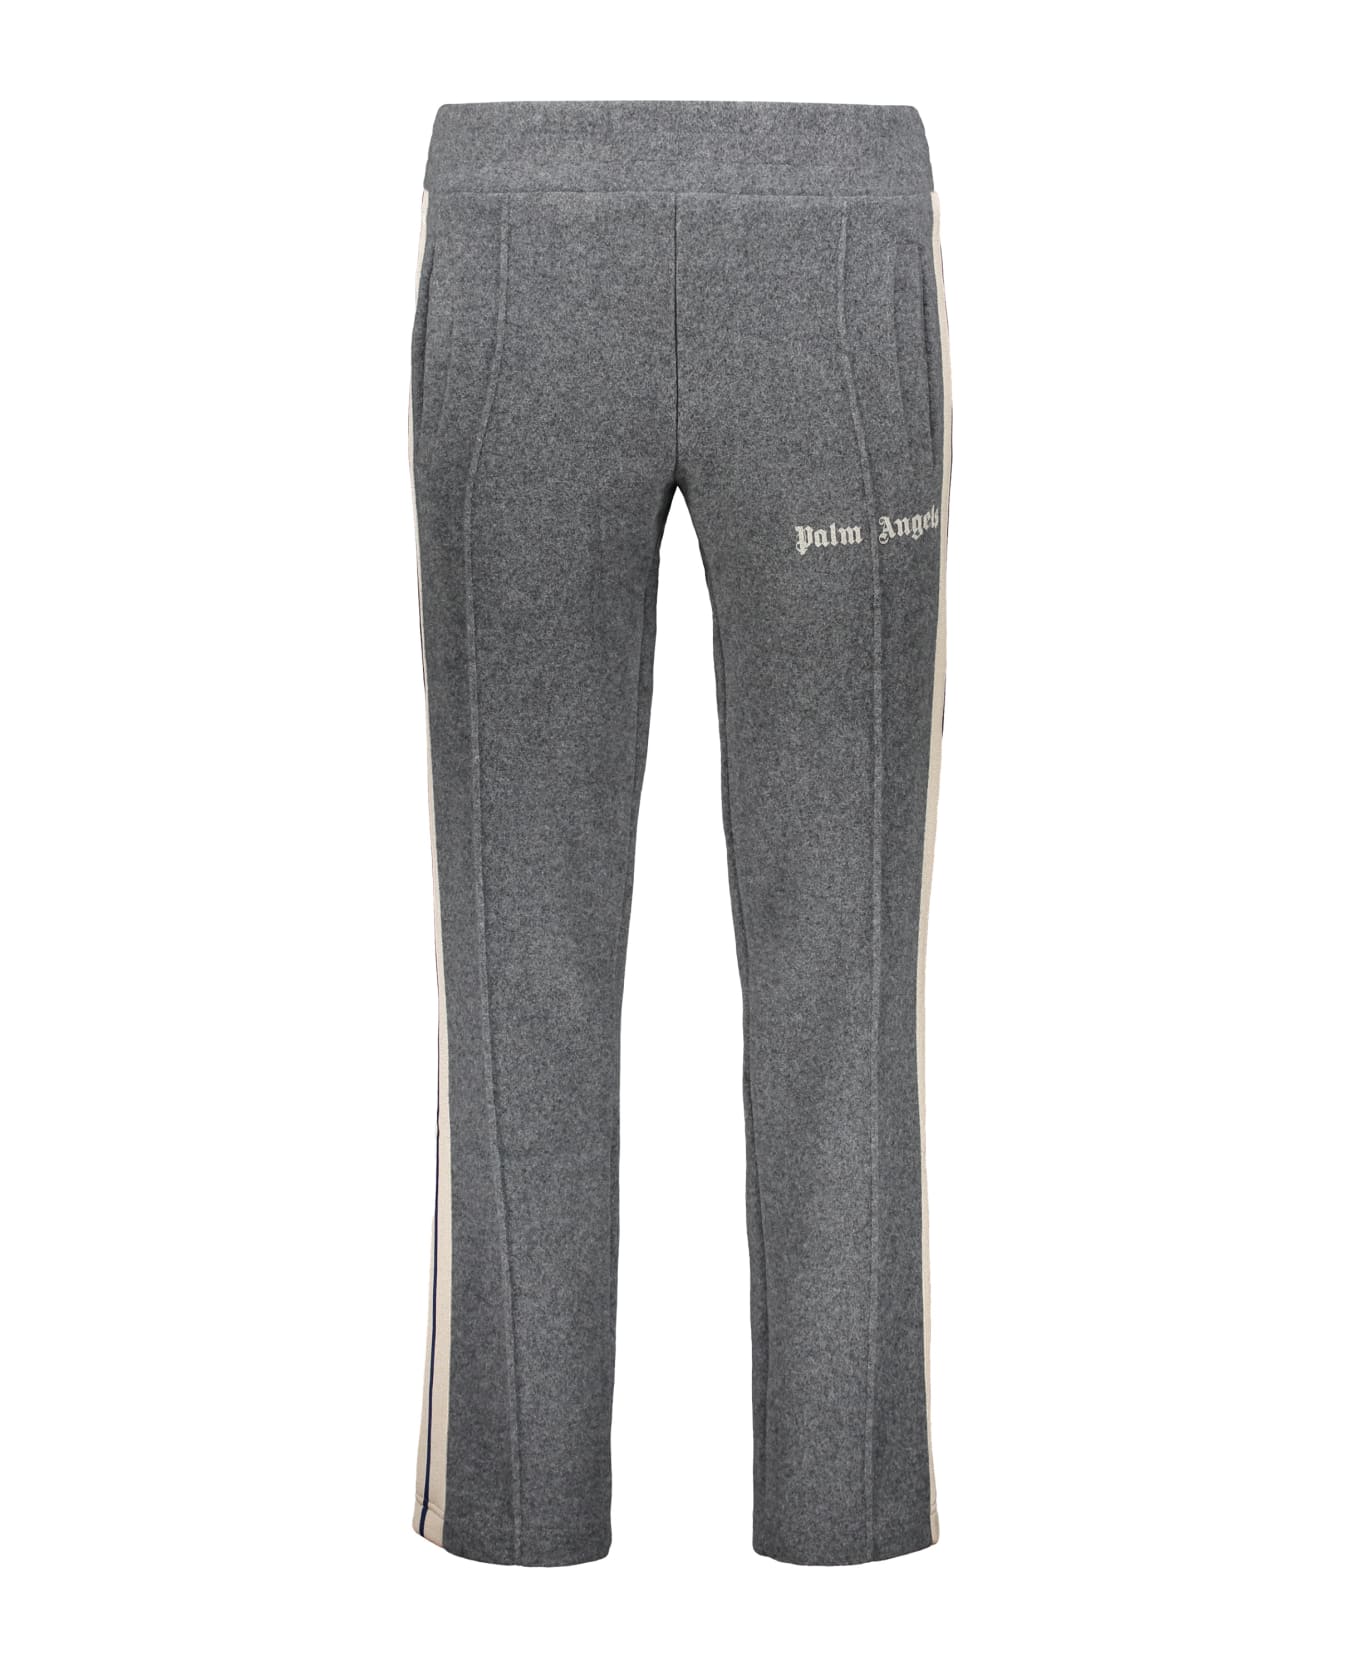 Palm Angels Track-pants With Decorative Stripes - grey ボトムス